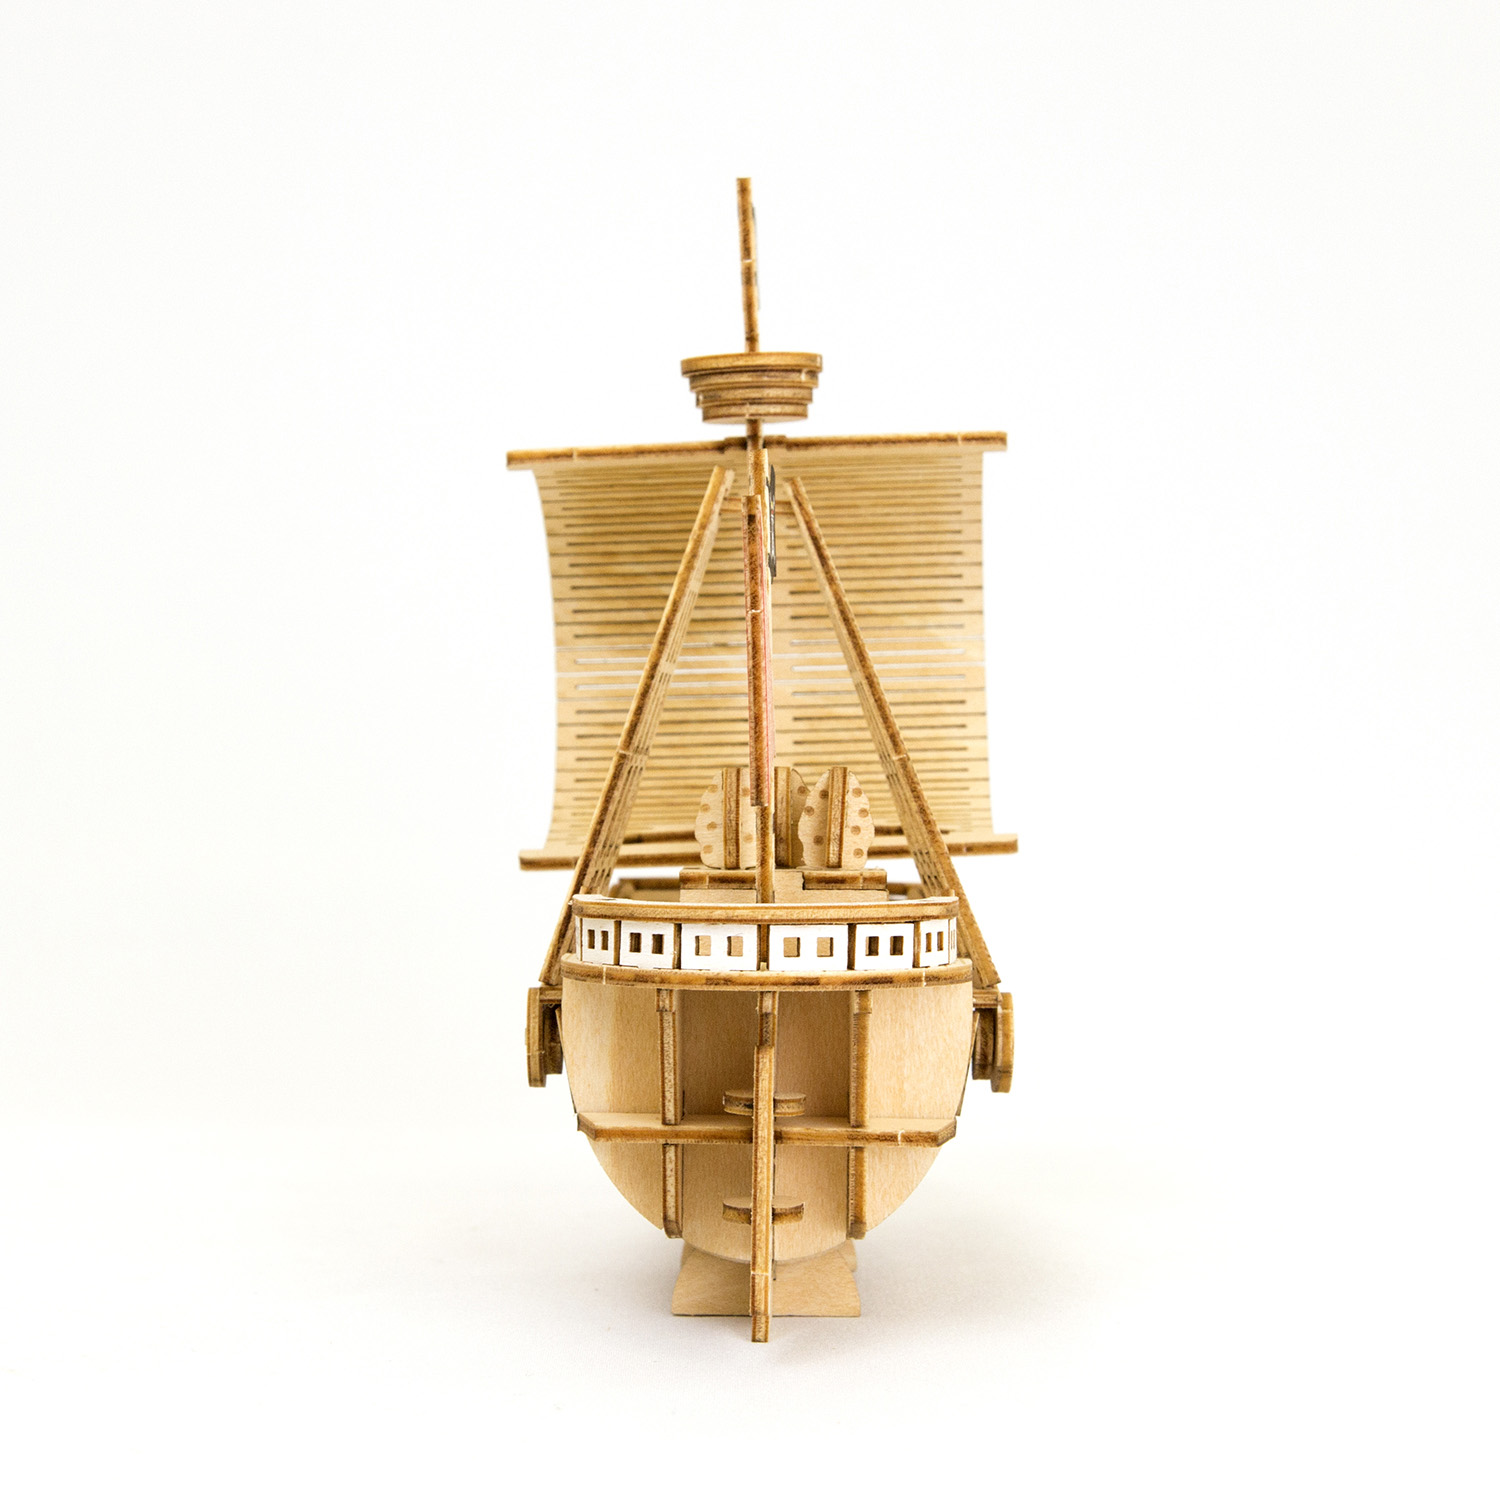  ki-gu-mi One Piece Going Merry Ship Model - One Piece Model Kit  Series - Japanese Miniature Wooden 3D Puzzle for Adults and Teens - Fun DIY  Wood Craft Kits for Adults